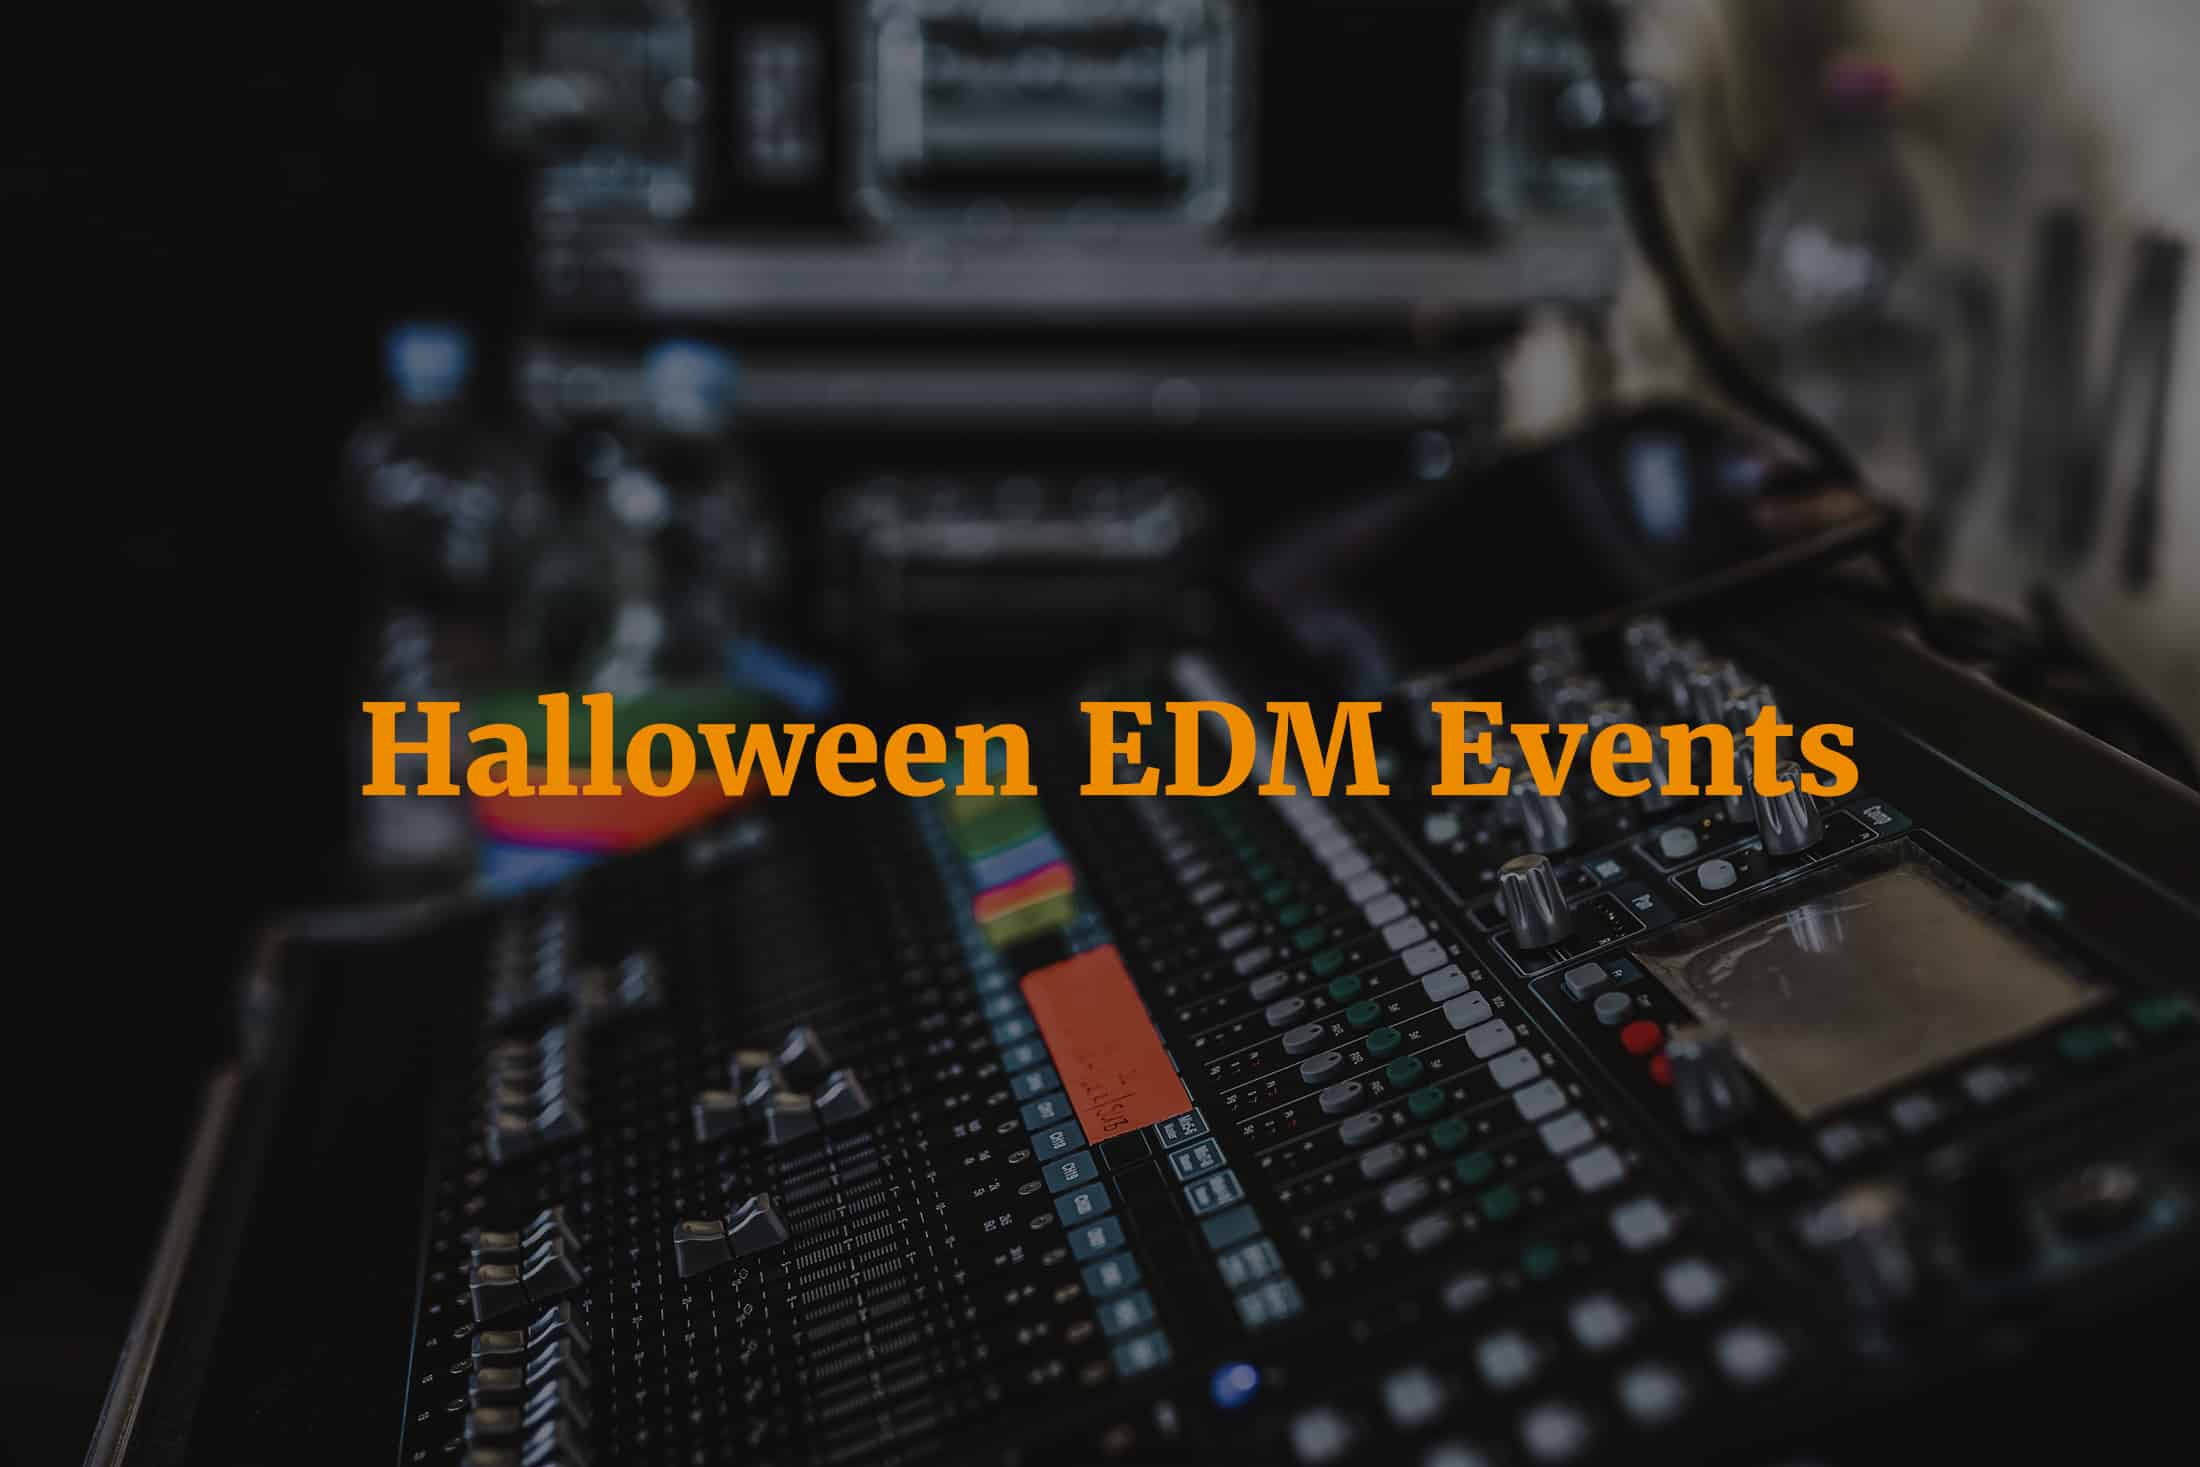 Featured image for “Halloween EDM 2018 Events in Denver, Colorado”